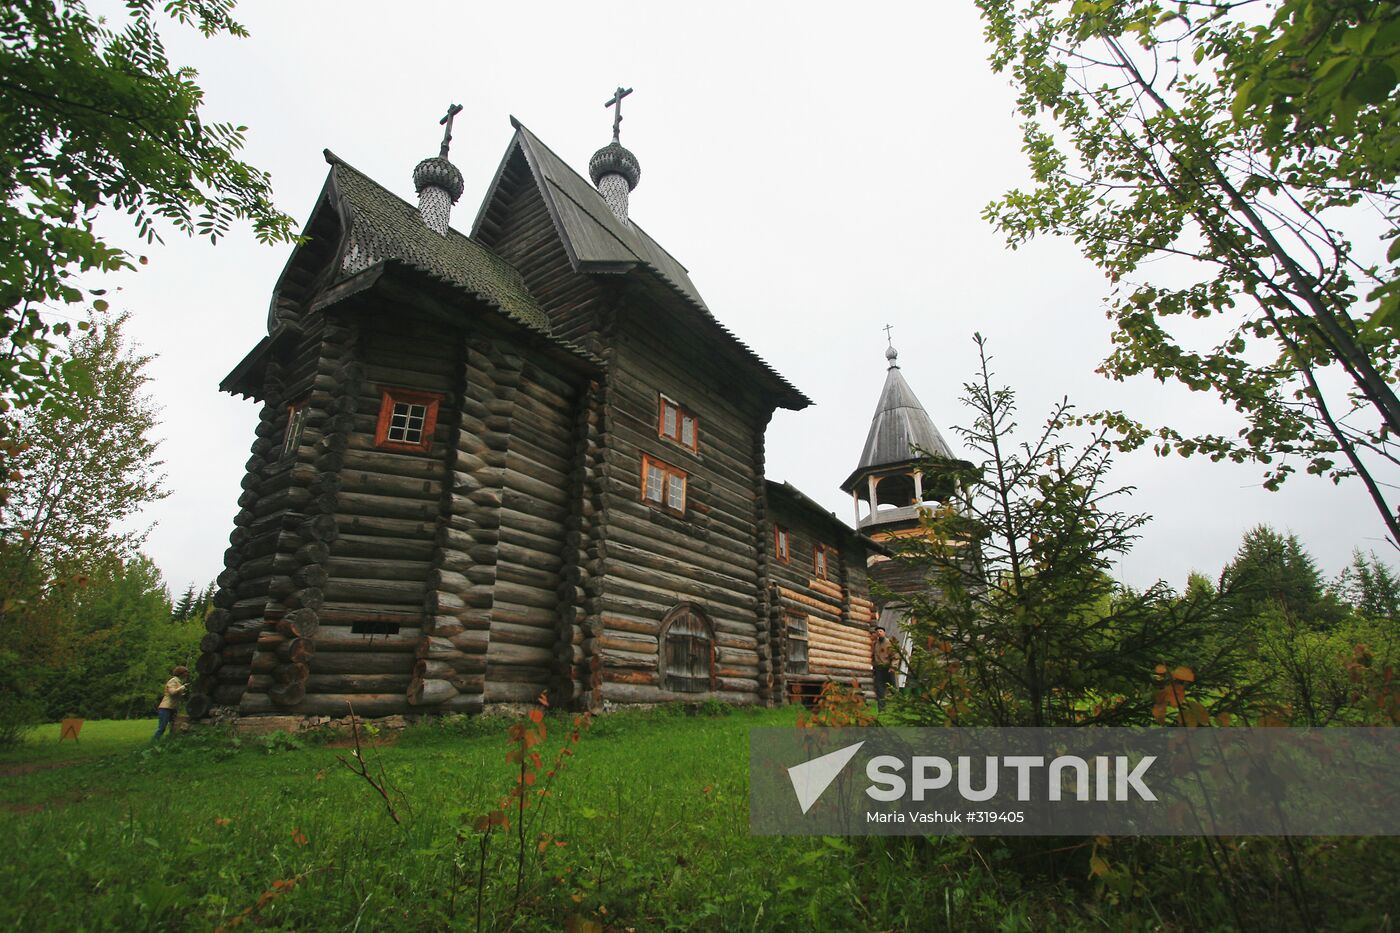 Khokhlovka architectural and ethnographic museum